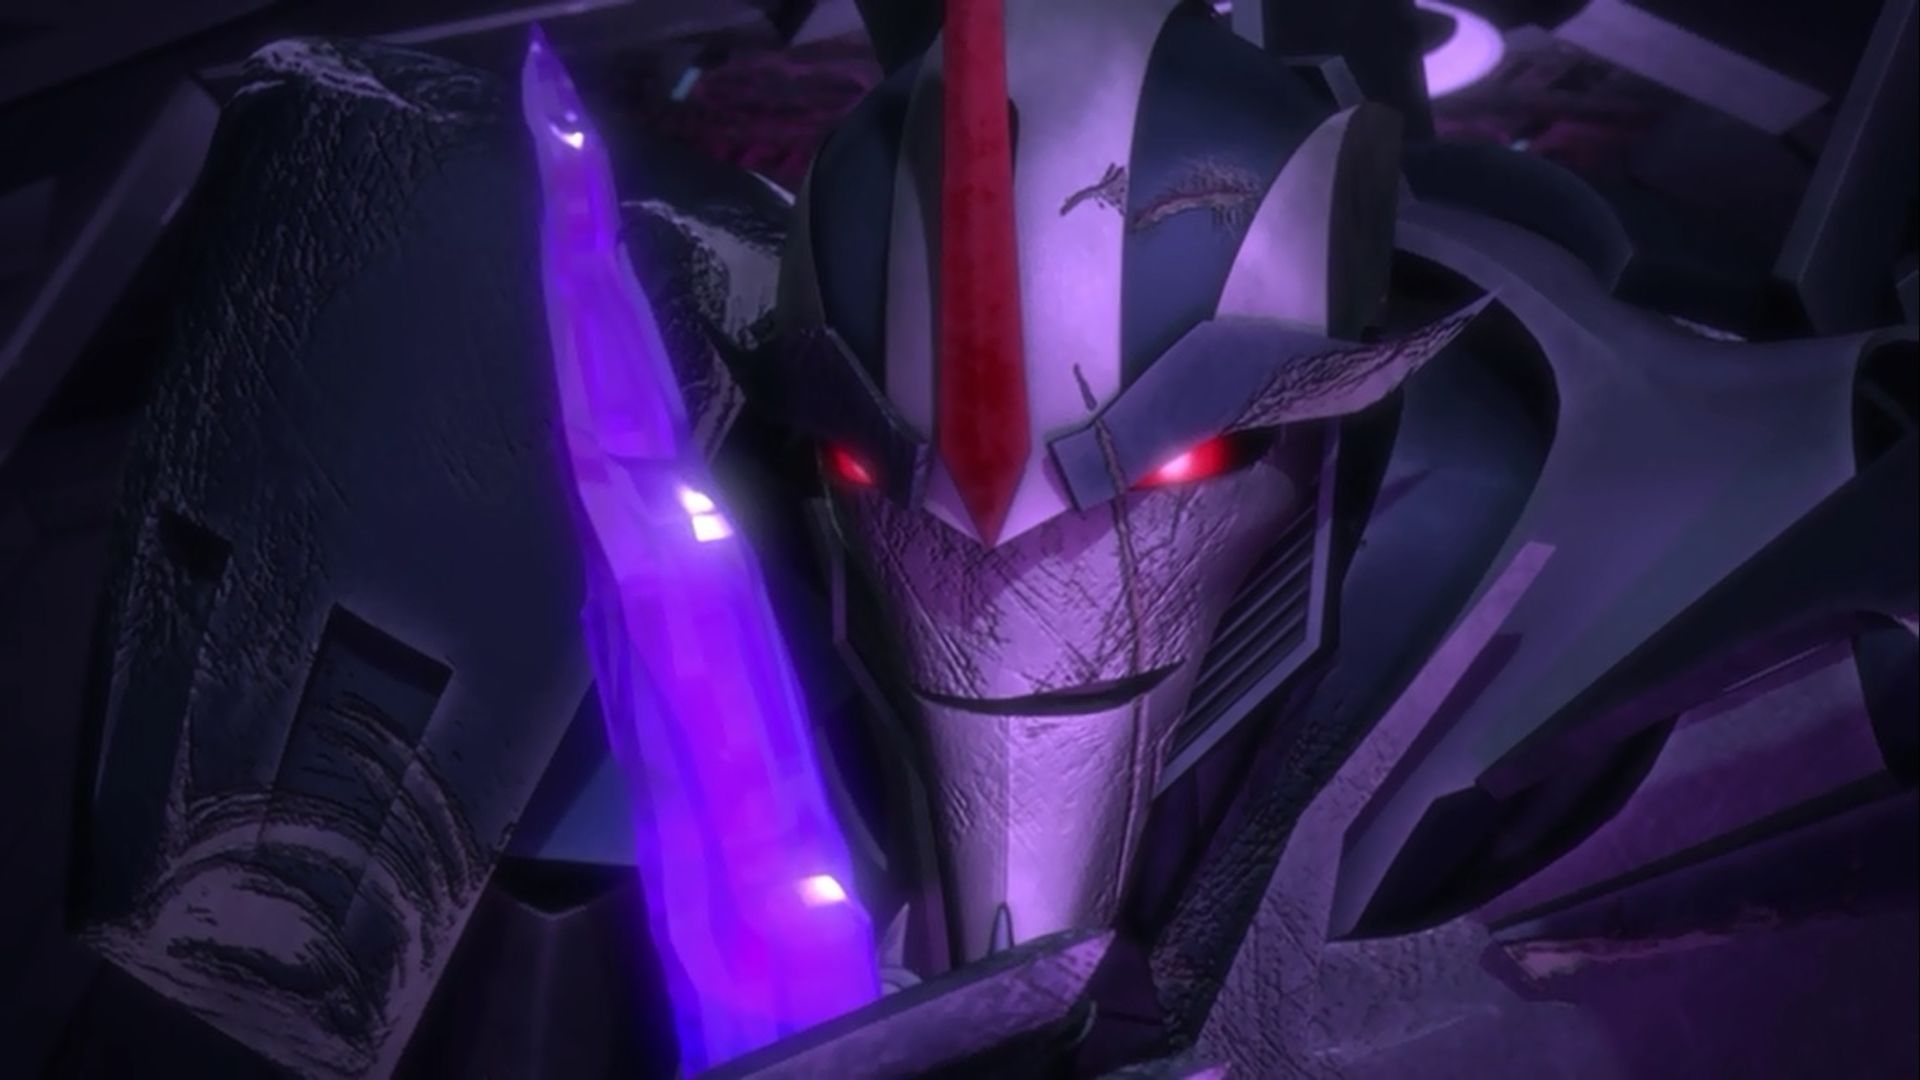 Transformers Prime background